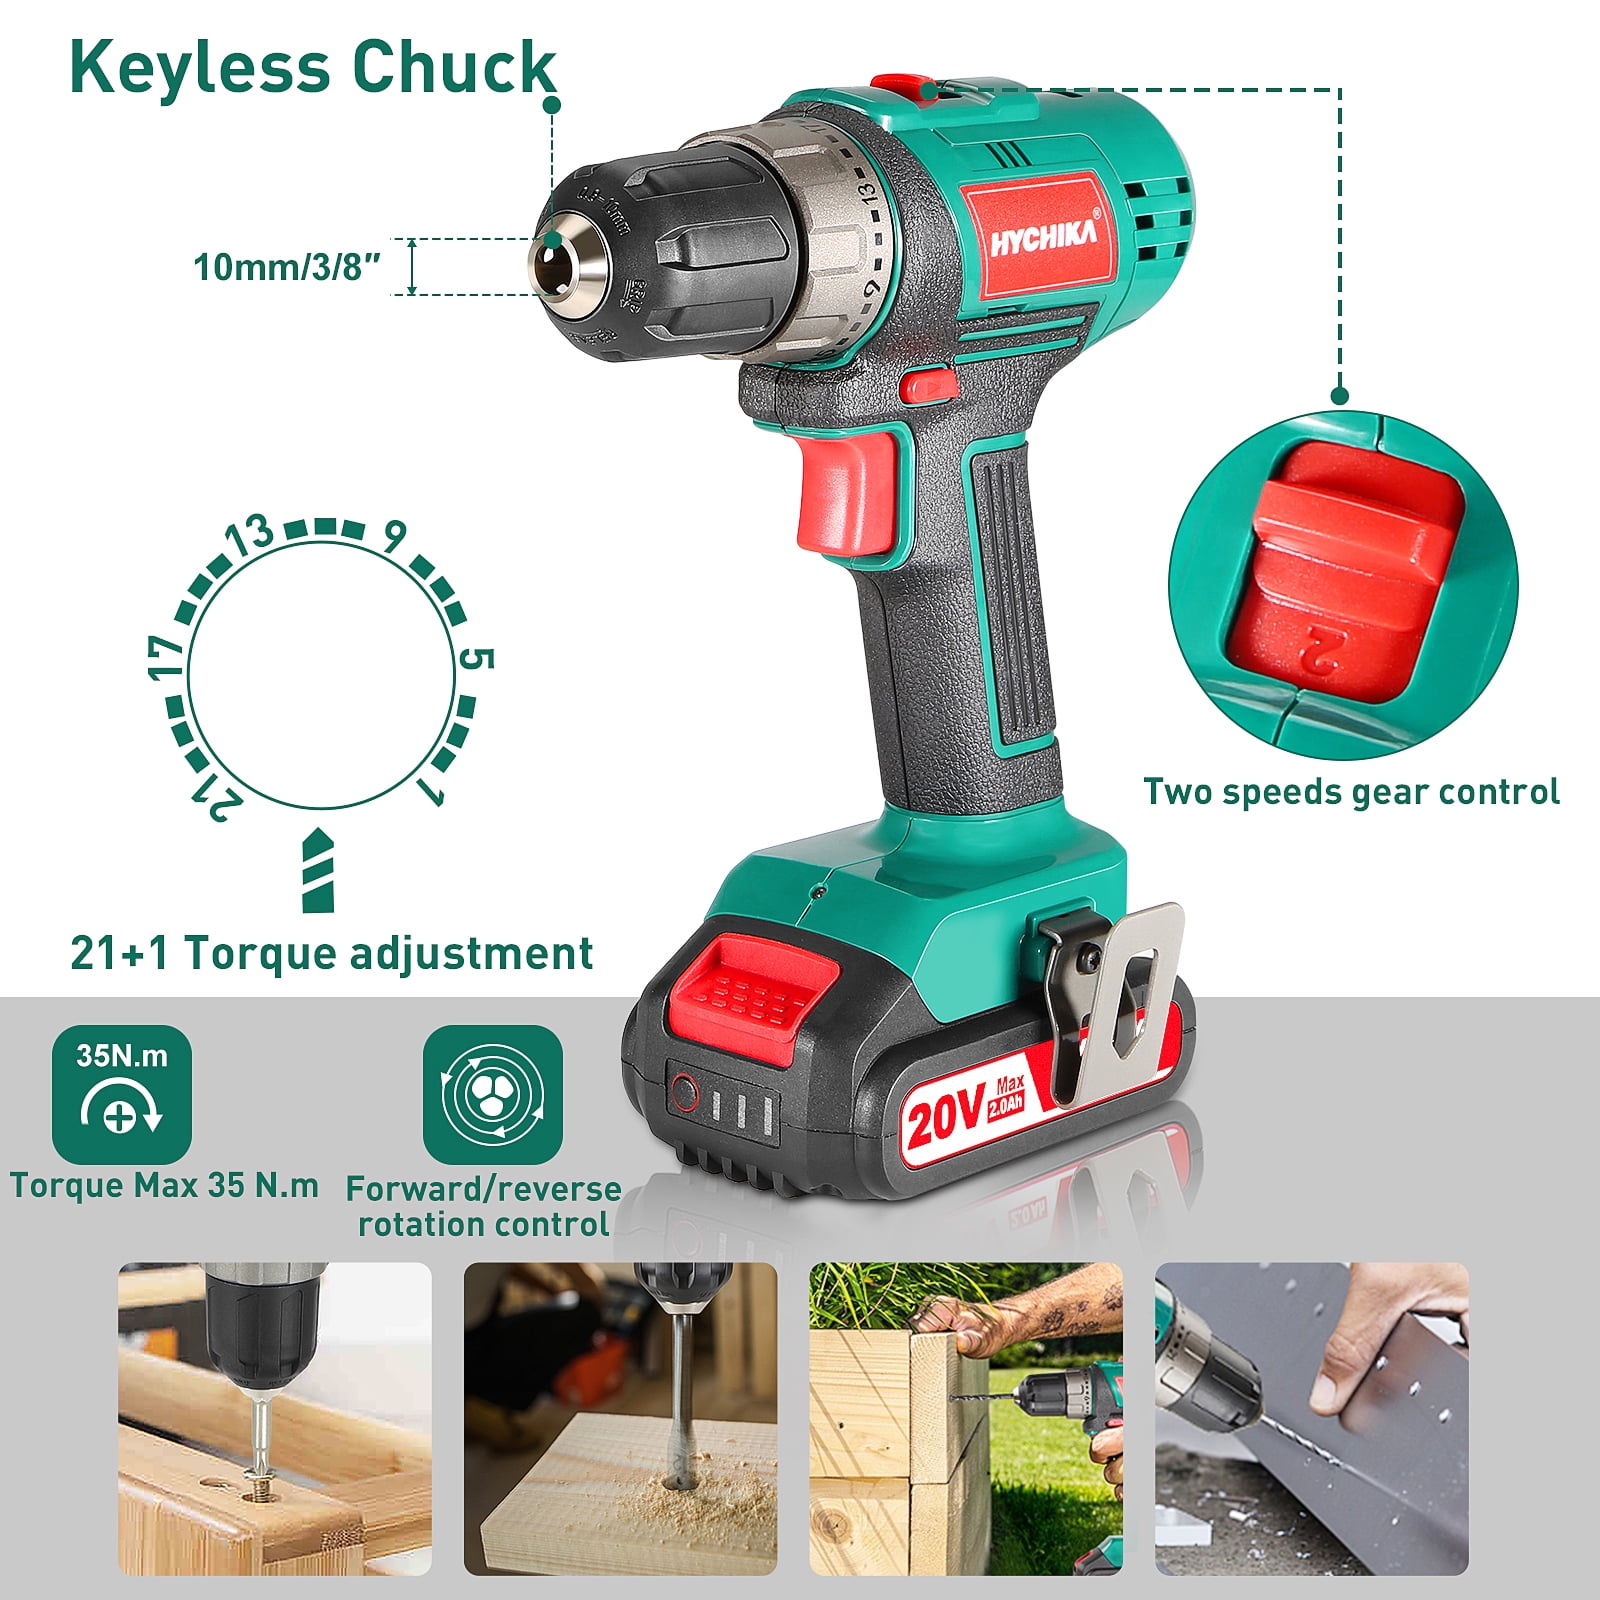 HYCHIKA 20V Home Tool Kit with Case, 104 PCS Cordless Drill Driver 